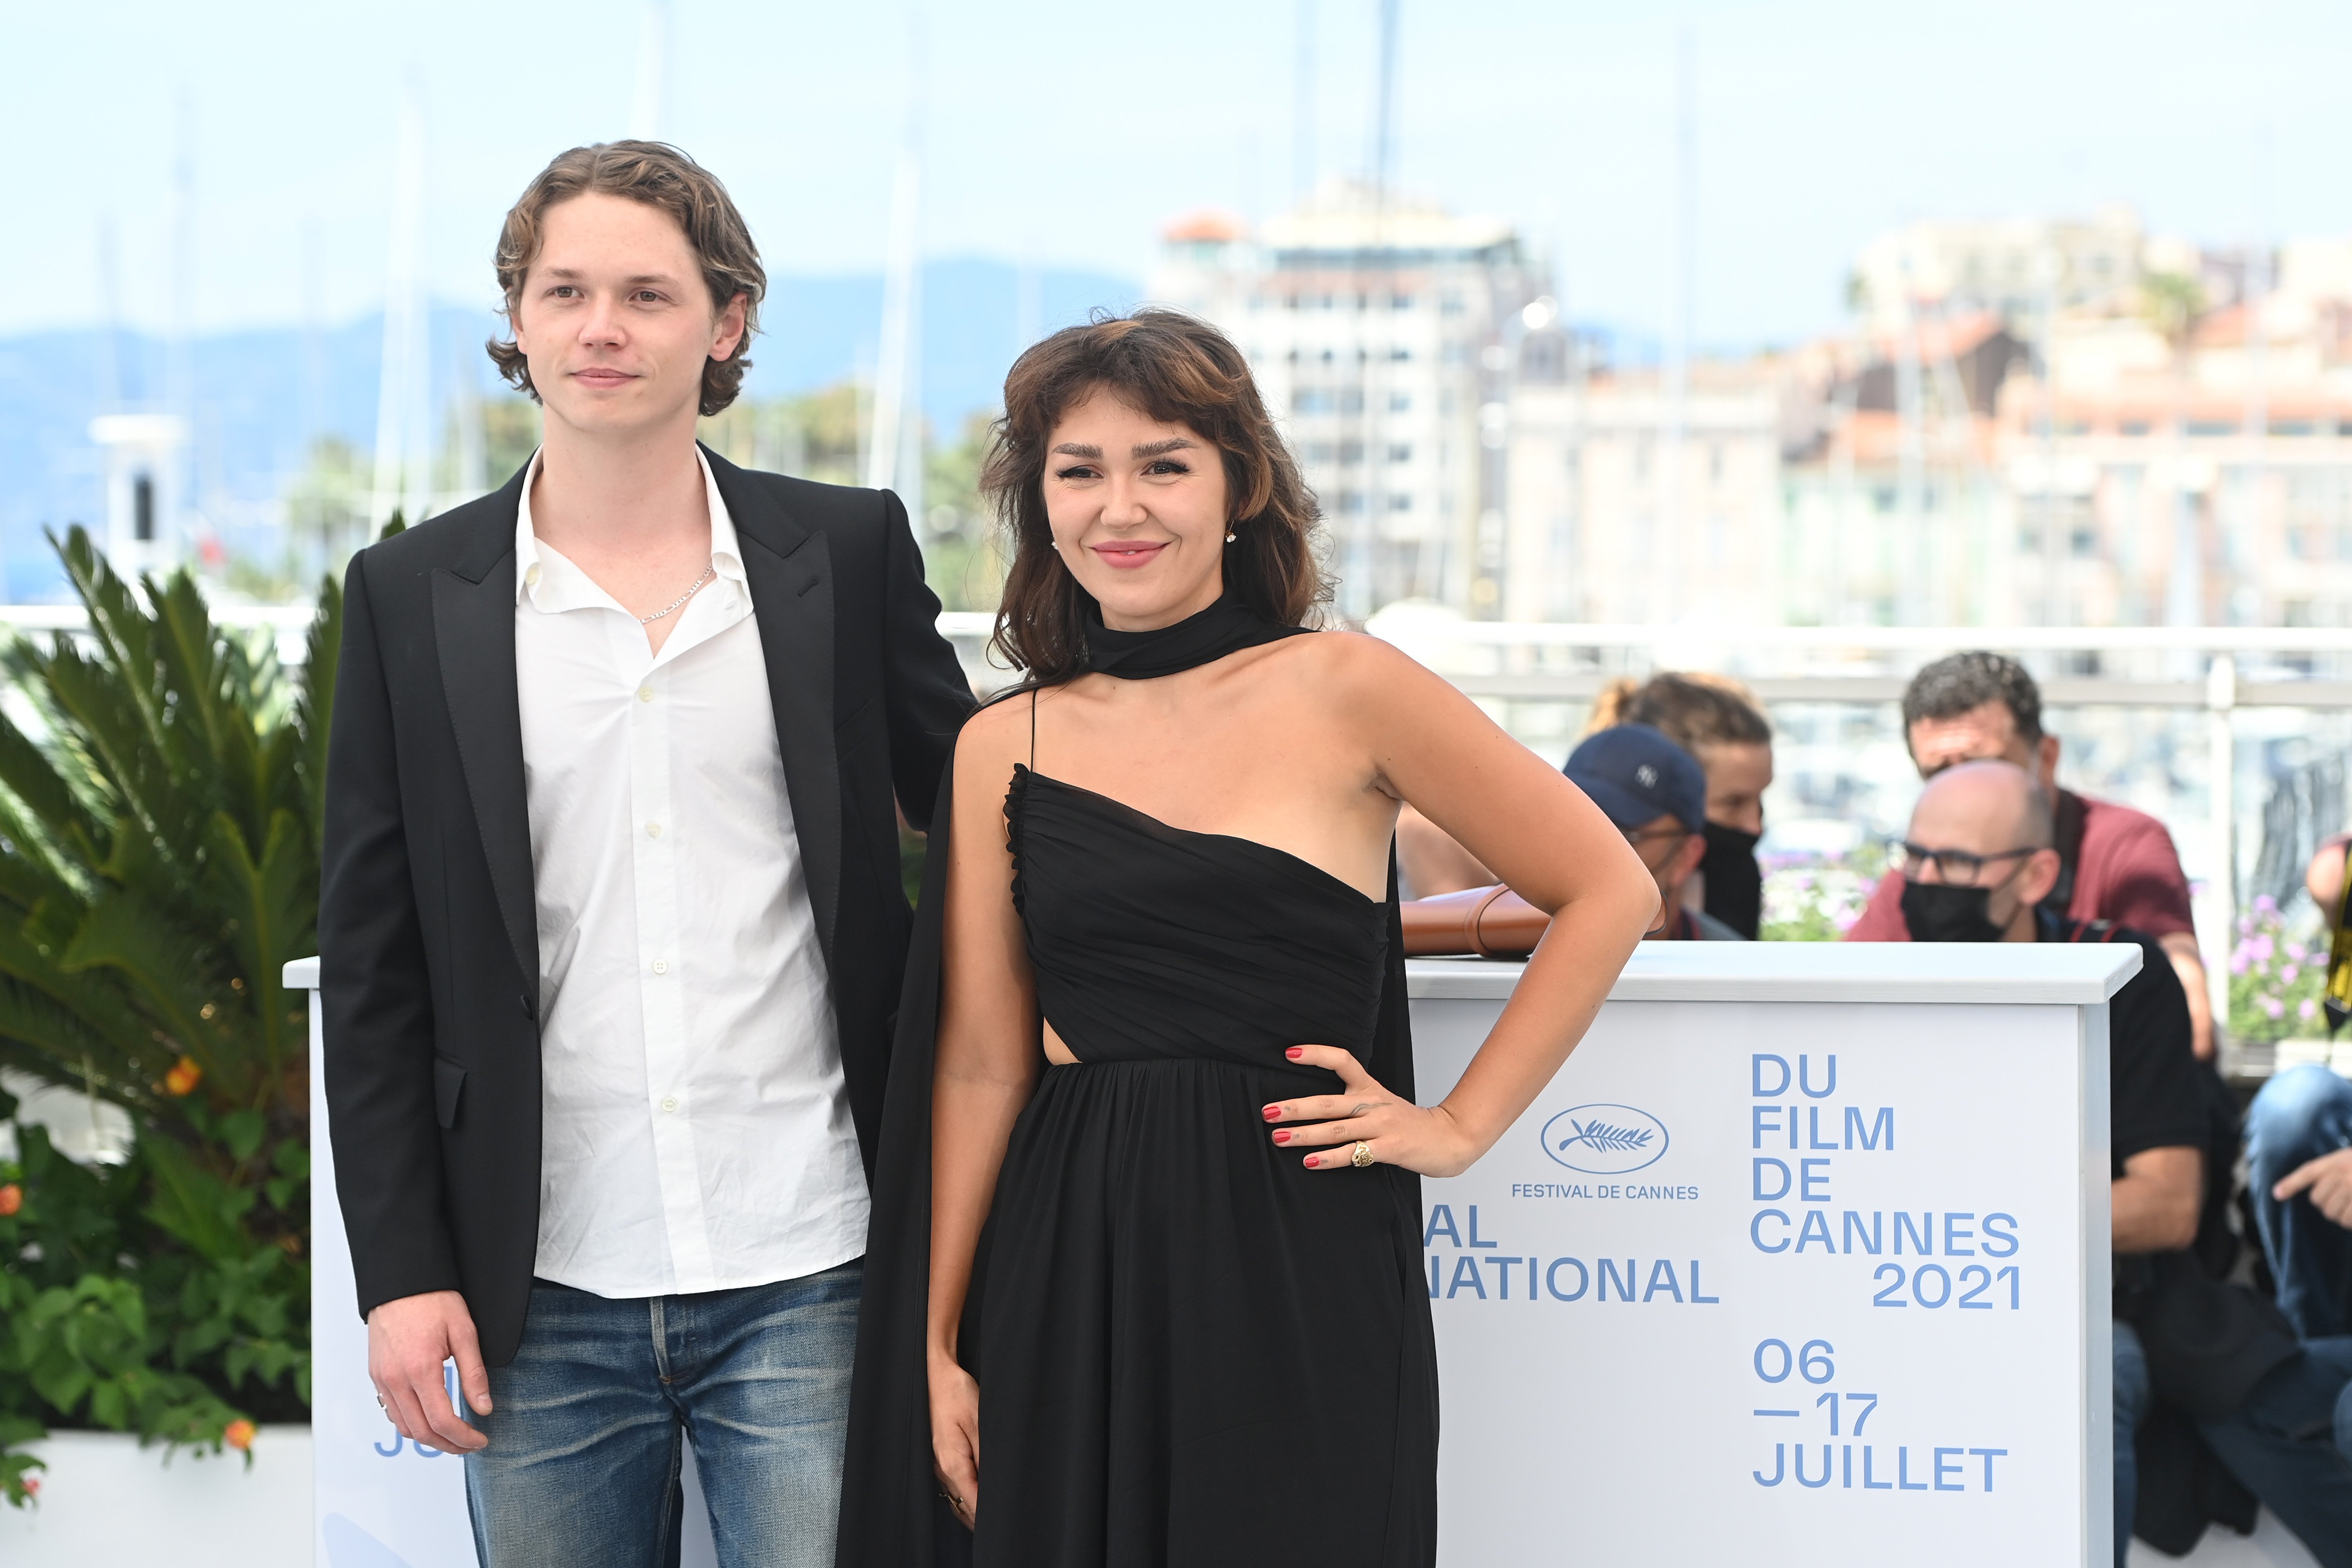 Jack Kilmer and Mercedes Kilmer attend "Val" photocall during the 74th annual Cannes Film Festival on July 07, 2021 in Cannes, France | Source: Getty Images